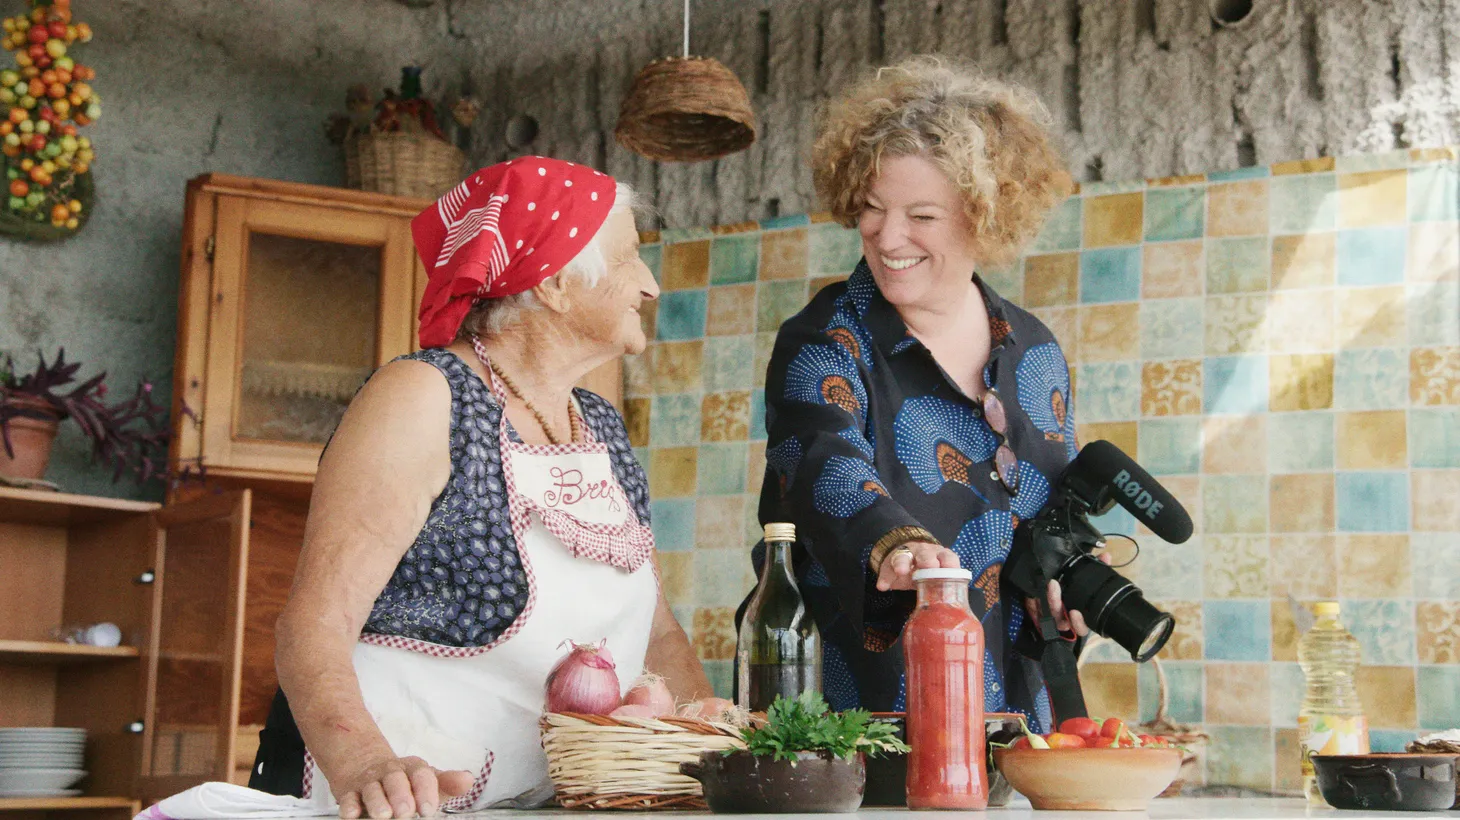 Vicky Bennison (right) began filming nonnas around Italy for the YouTube series "Pasta Grannies." She later compiled their recipes into two cookbooks.